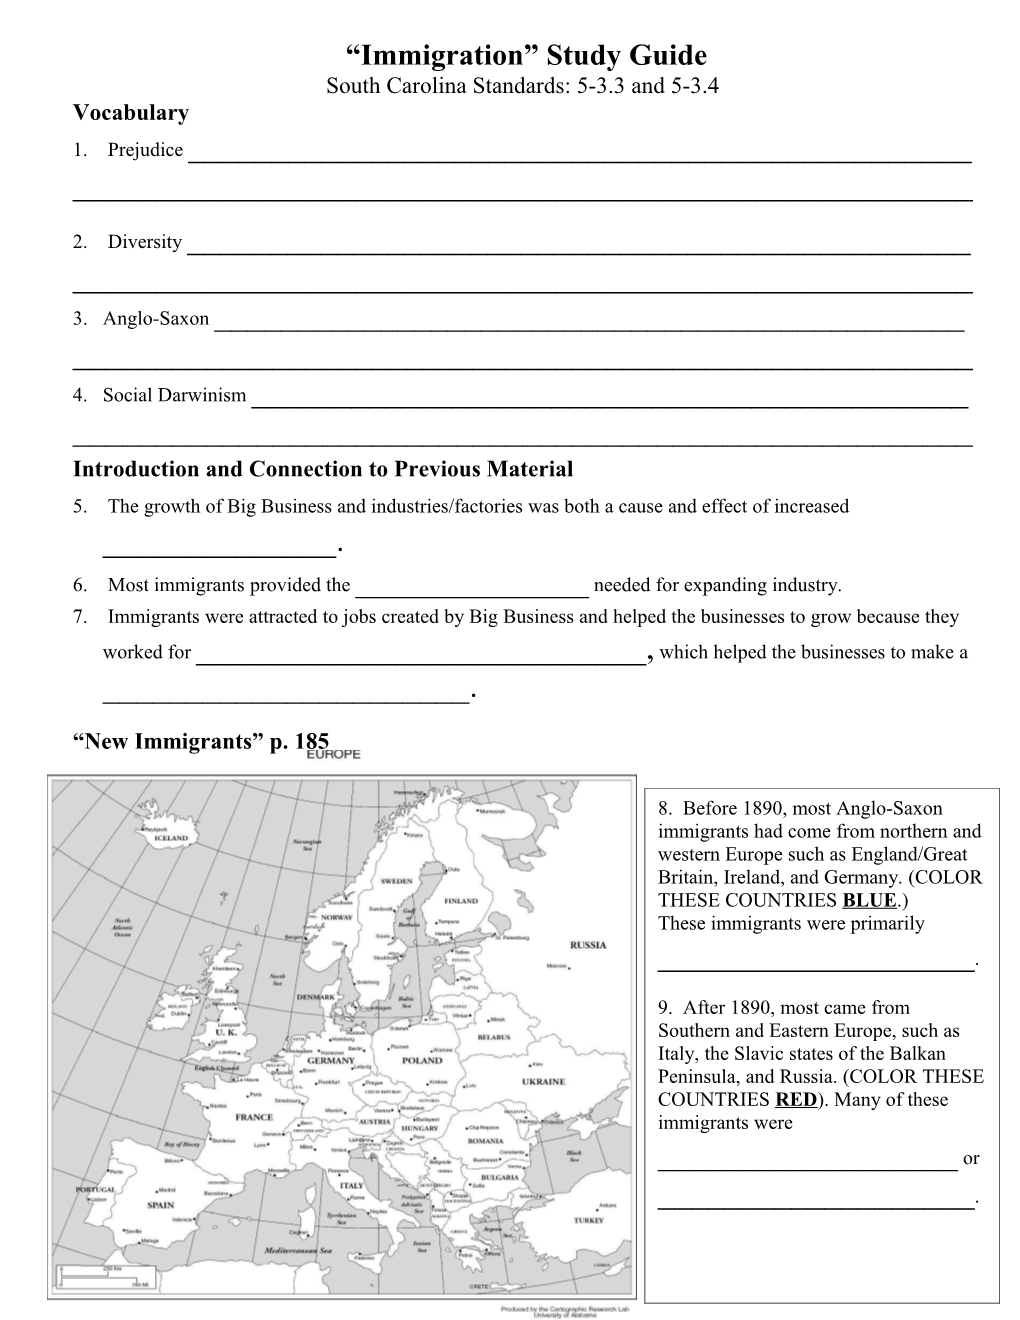 Chapter 4 Lesson 3: New Americans Study Guide